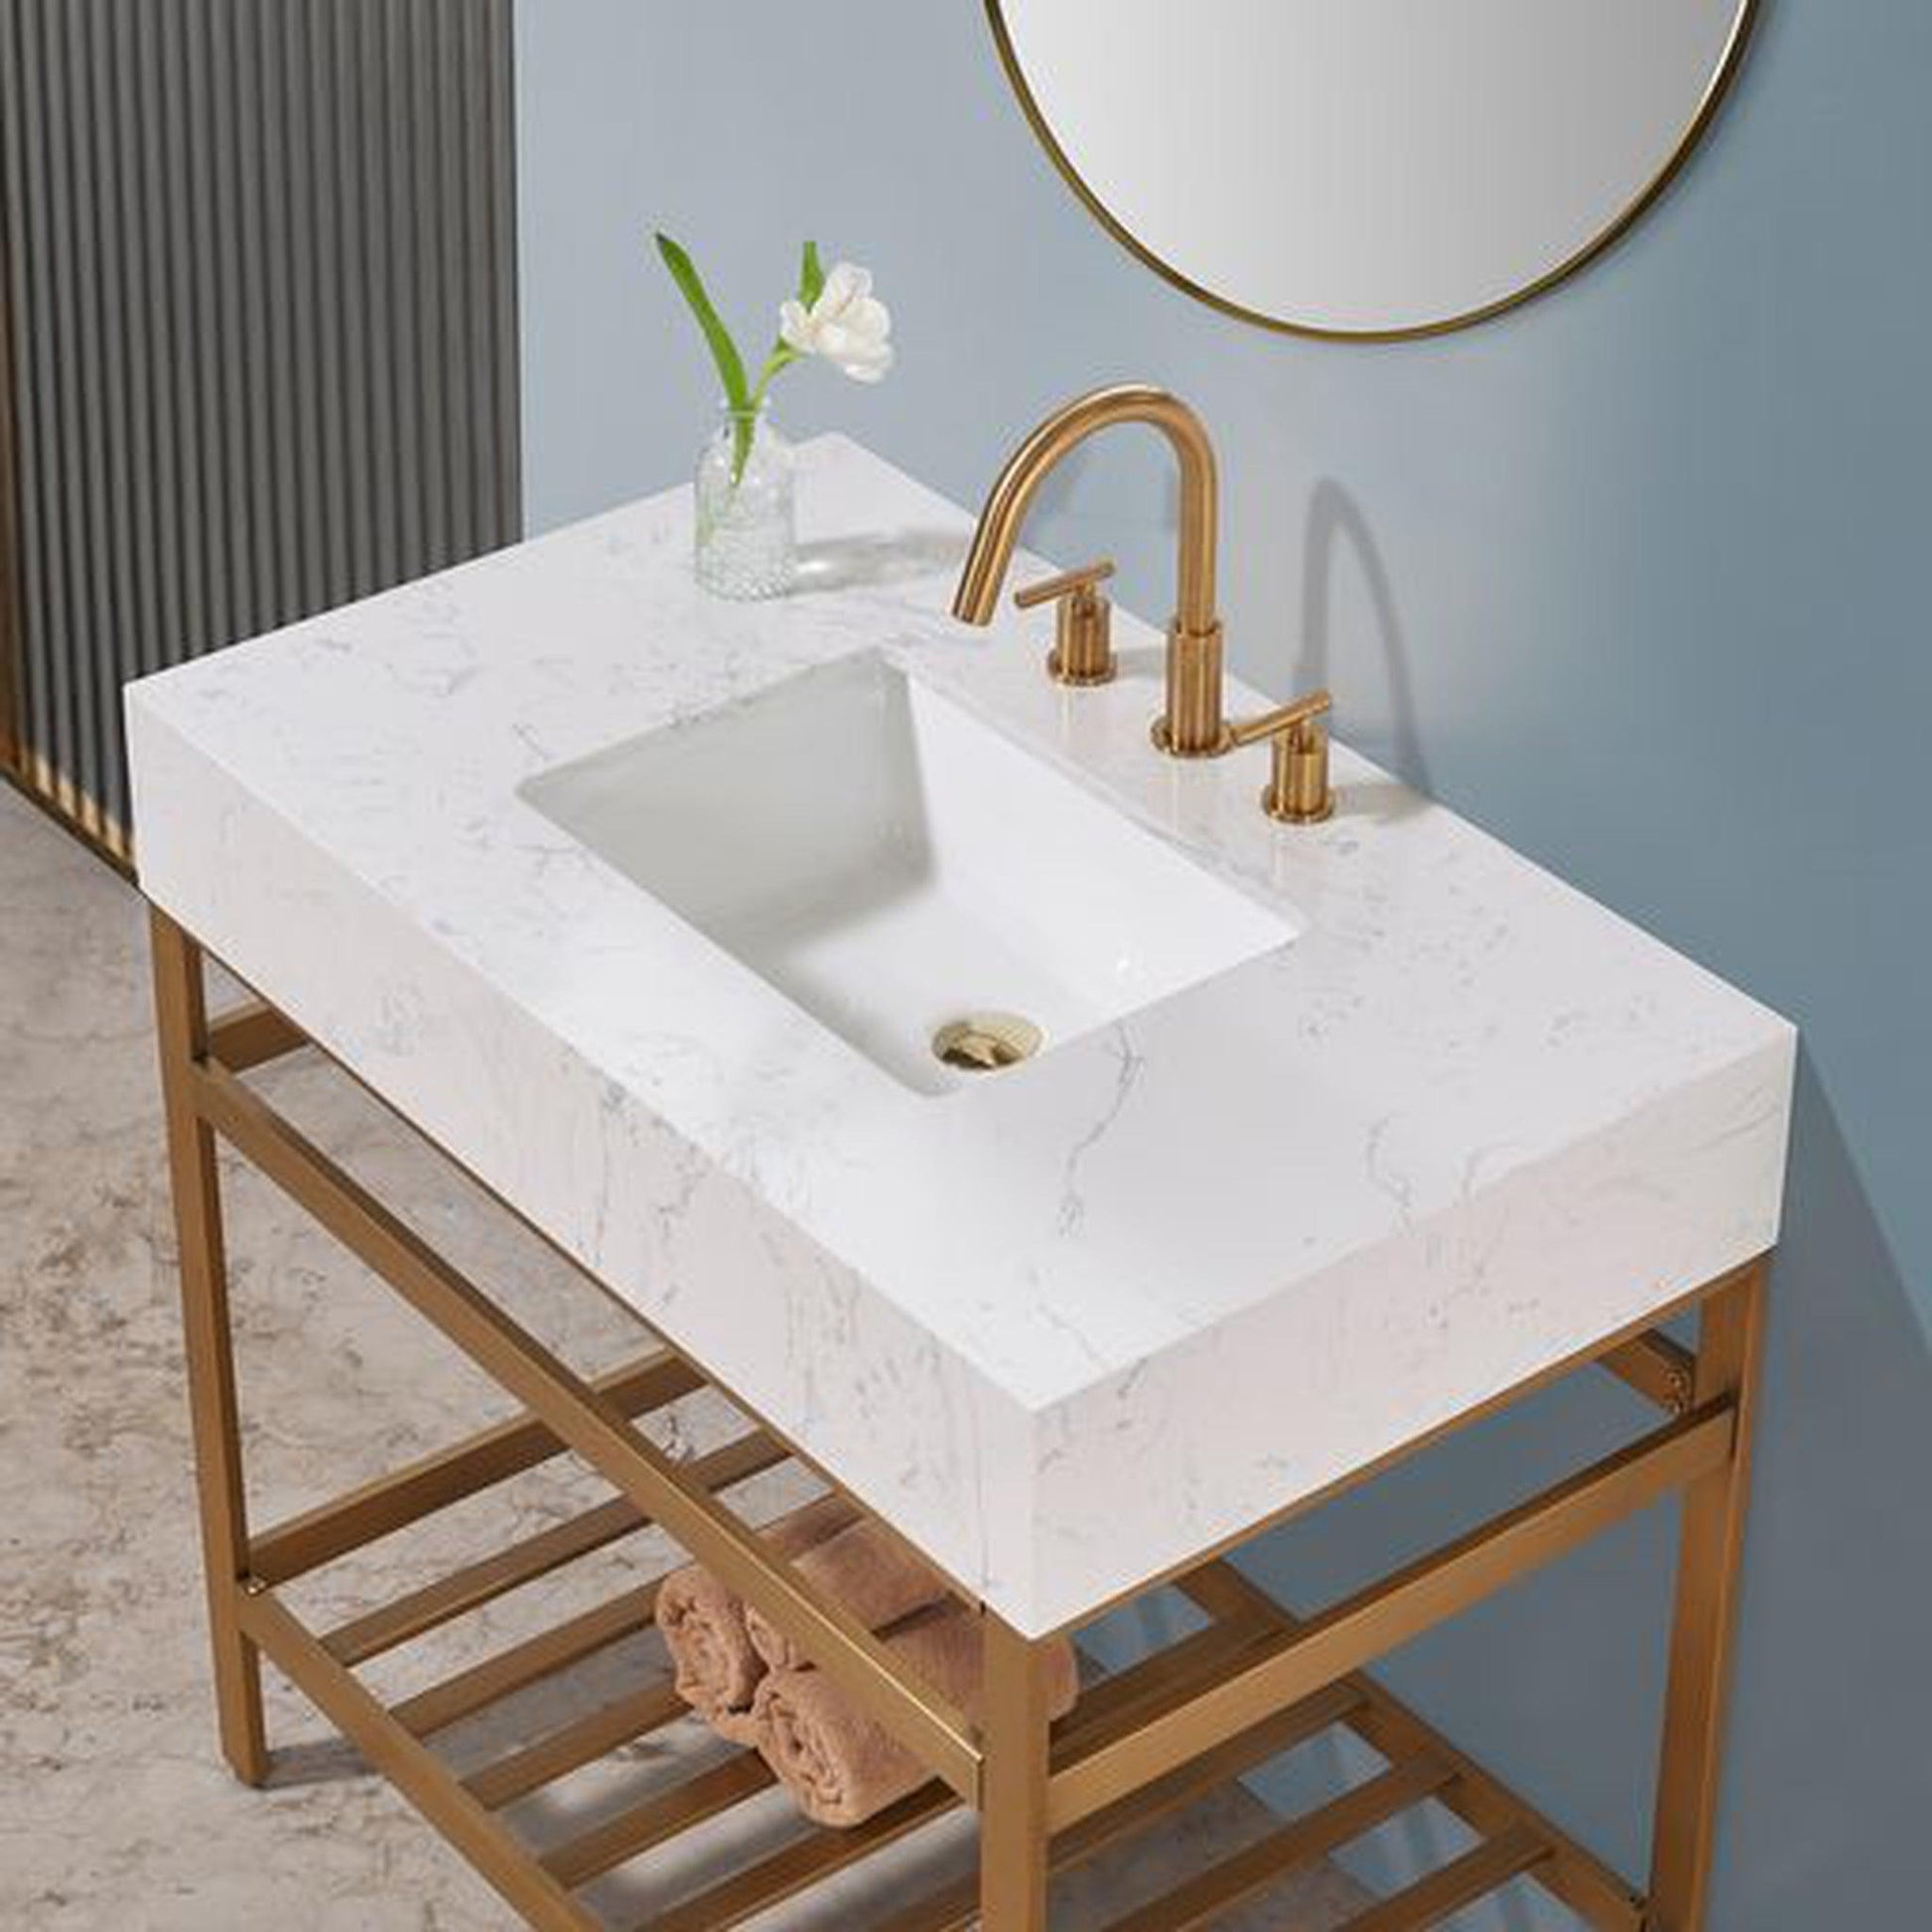 Altair Merano 36" Brushed Gold Single Stainless Steel Bathroom Vanity Set Console With Mirror, Aosta White Stone Top, Single Rectangular Undermount Ceramic Sink, and Safety Overflow Hole